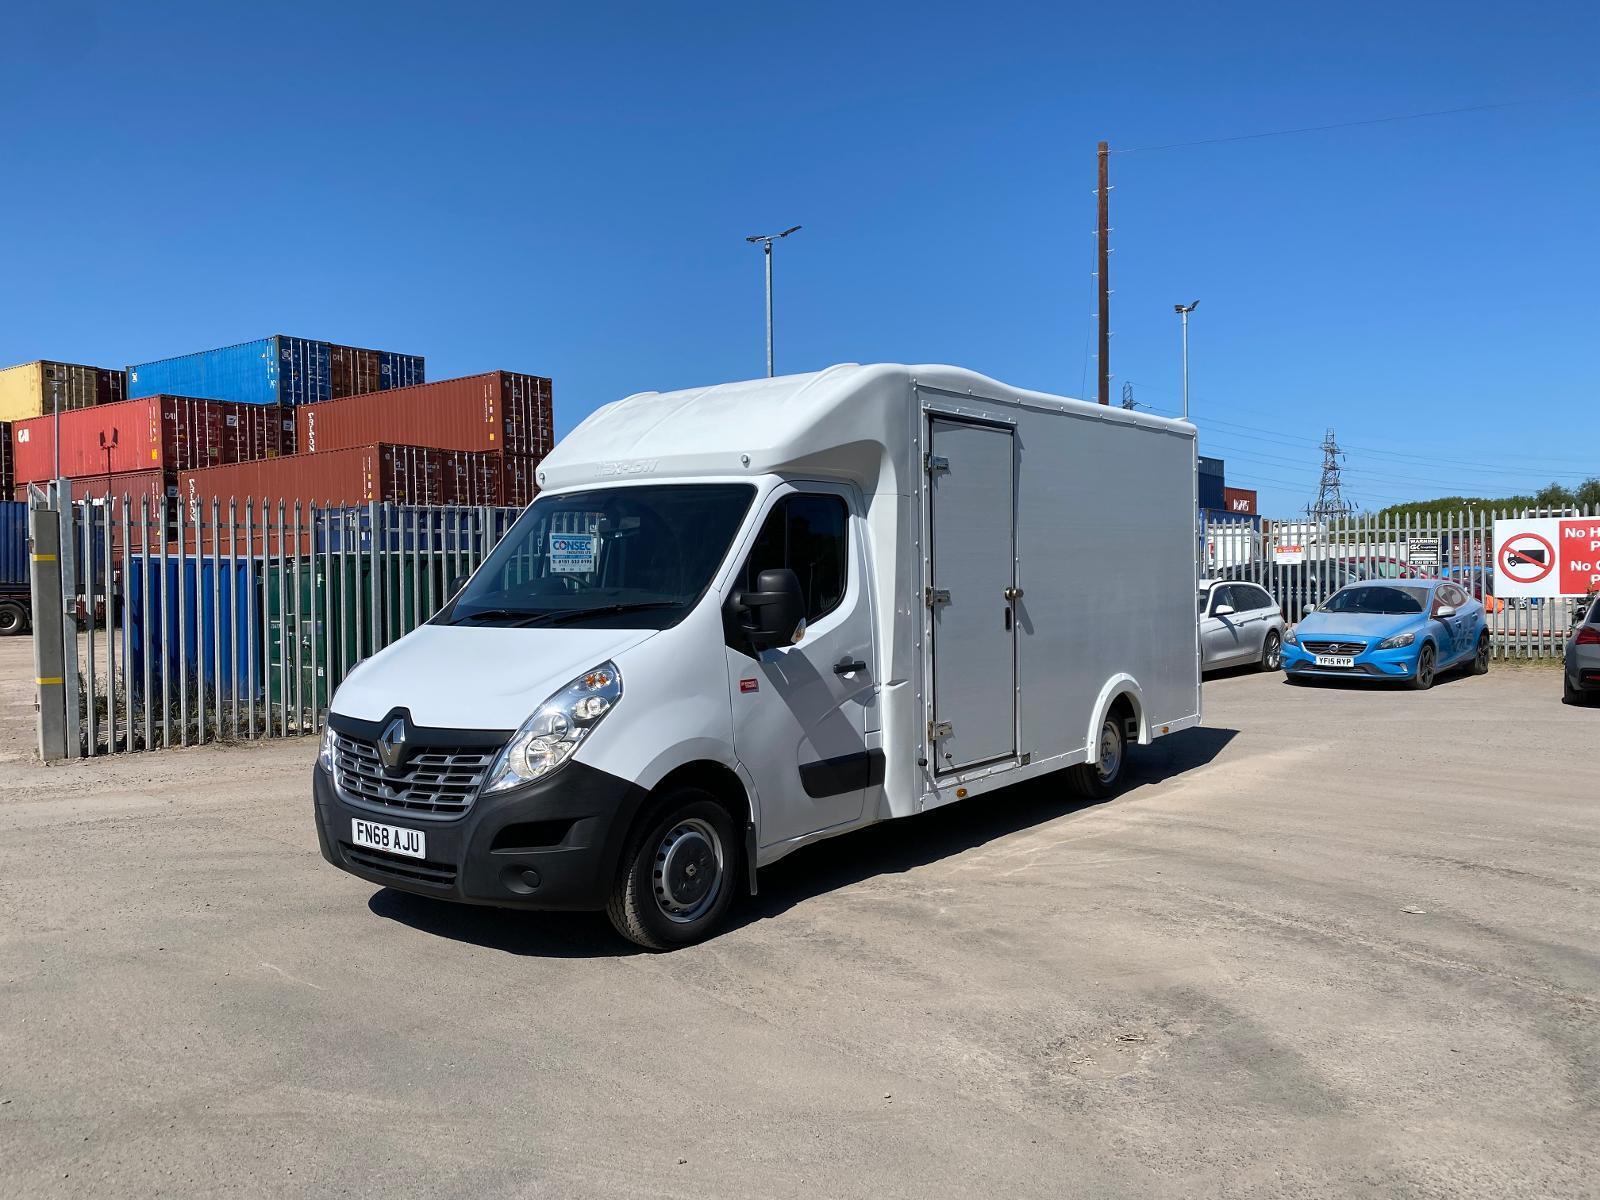 Bid on 2018 68RENAULT MASTER 2.3DCI LOW LOADER LUTON BOXE EURO6 ADBLUE CHOICE 7- Buy &amp; Sell on Auction with EAMA Group